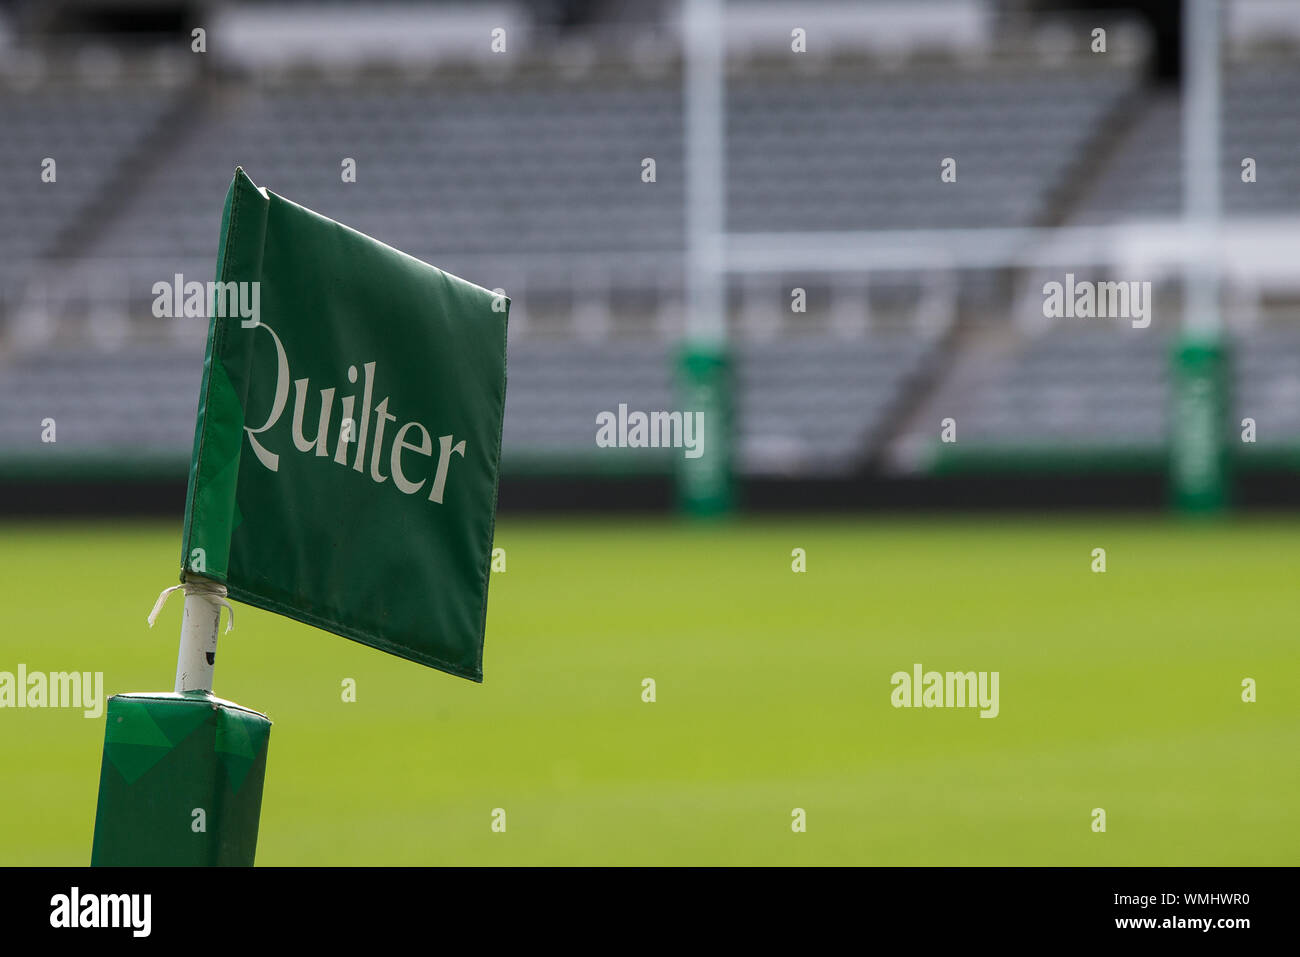 Newcastle, UK. 05th Sep, 2019. NEWCASTLE UPON TYNE, ENGLAND. SEPT 5TH Quilter branding on the corner flag with posts in the background at The Gallowgate End during Italy's Captain's run at St James' Park, Newcastle upon Tyne on Thursday 6th September 2019 (Credit: Chris Lishman | MI News) Credit: MI News & Sport /Alamy Live News Stock Photo